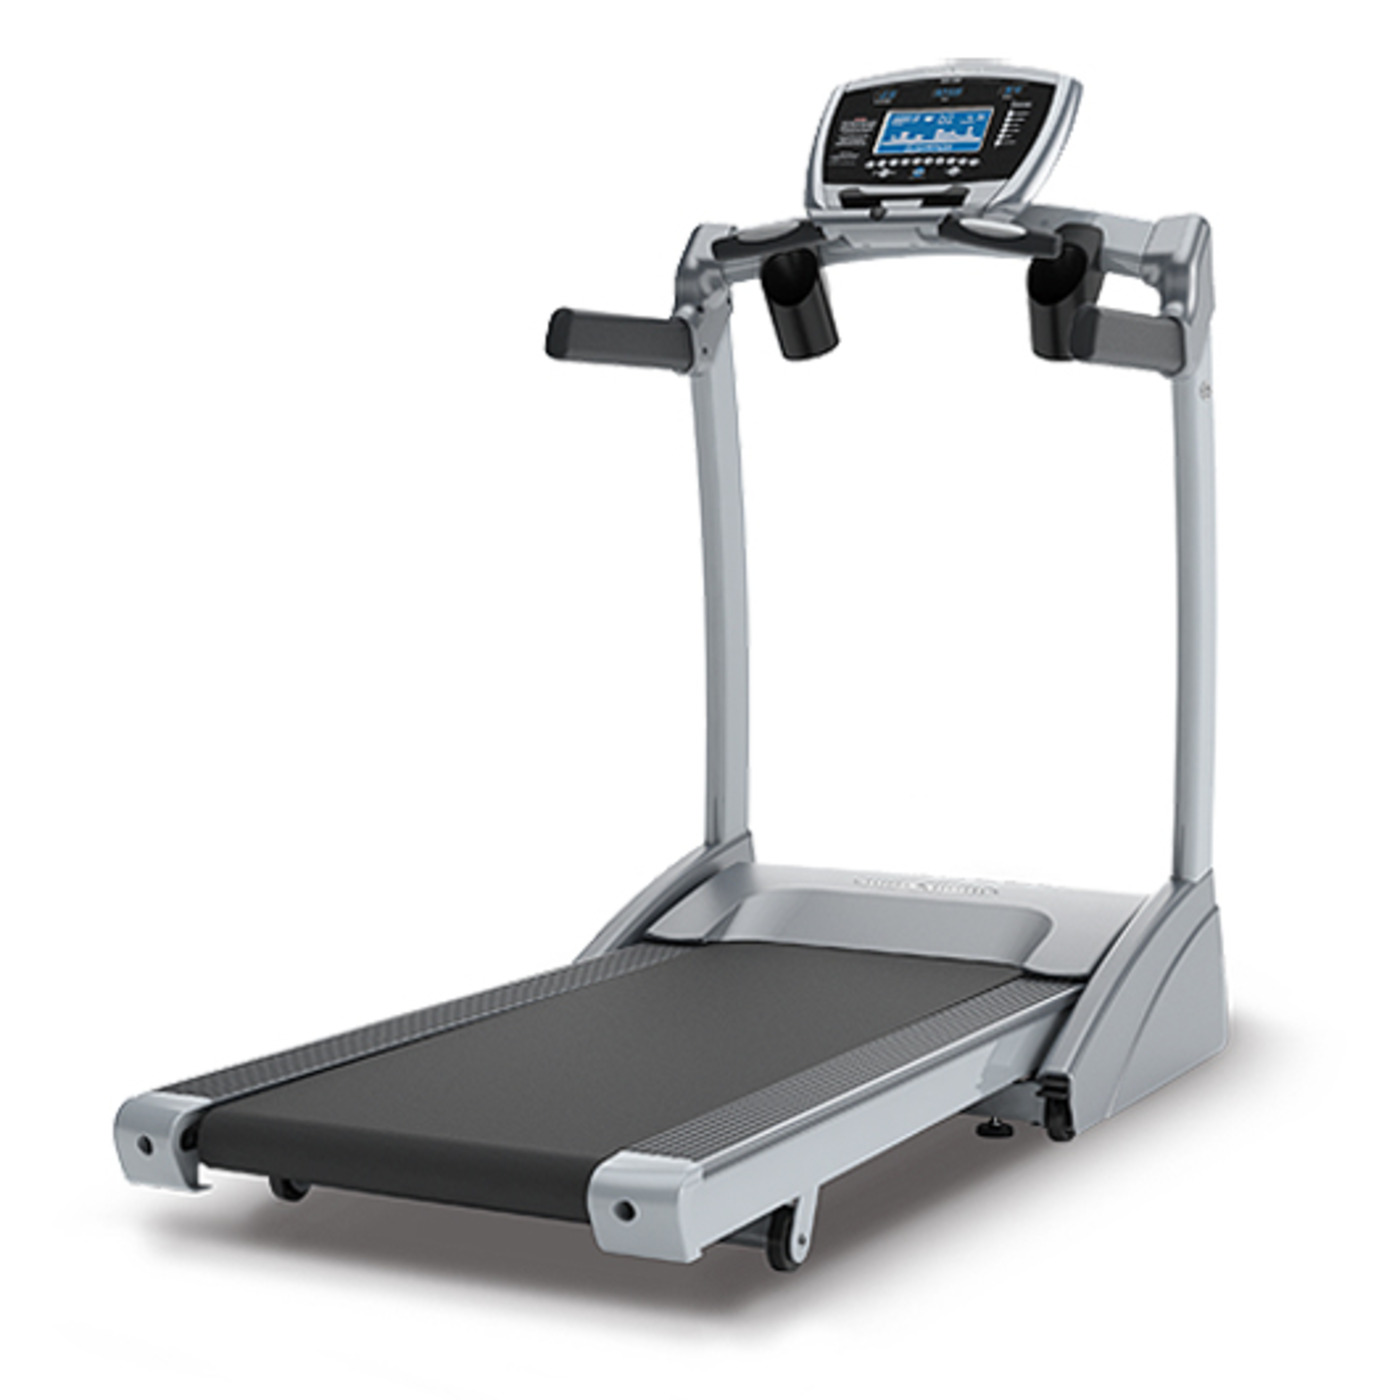 T9550 Treadmill (with New Simple